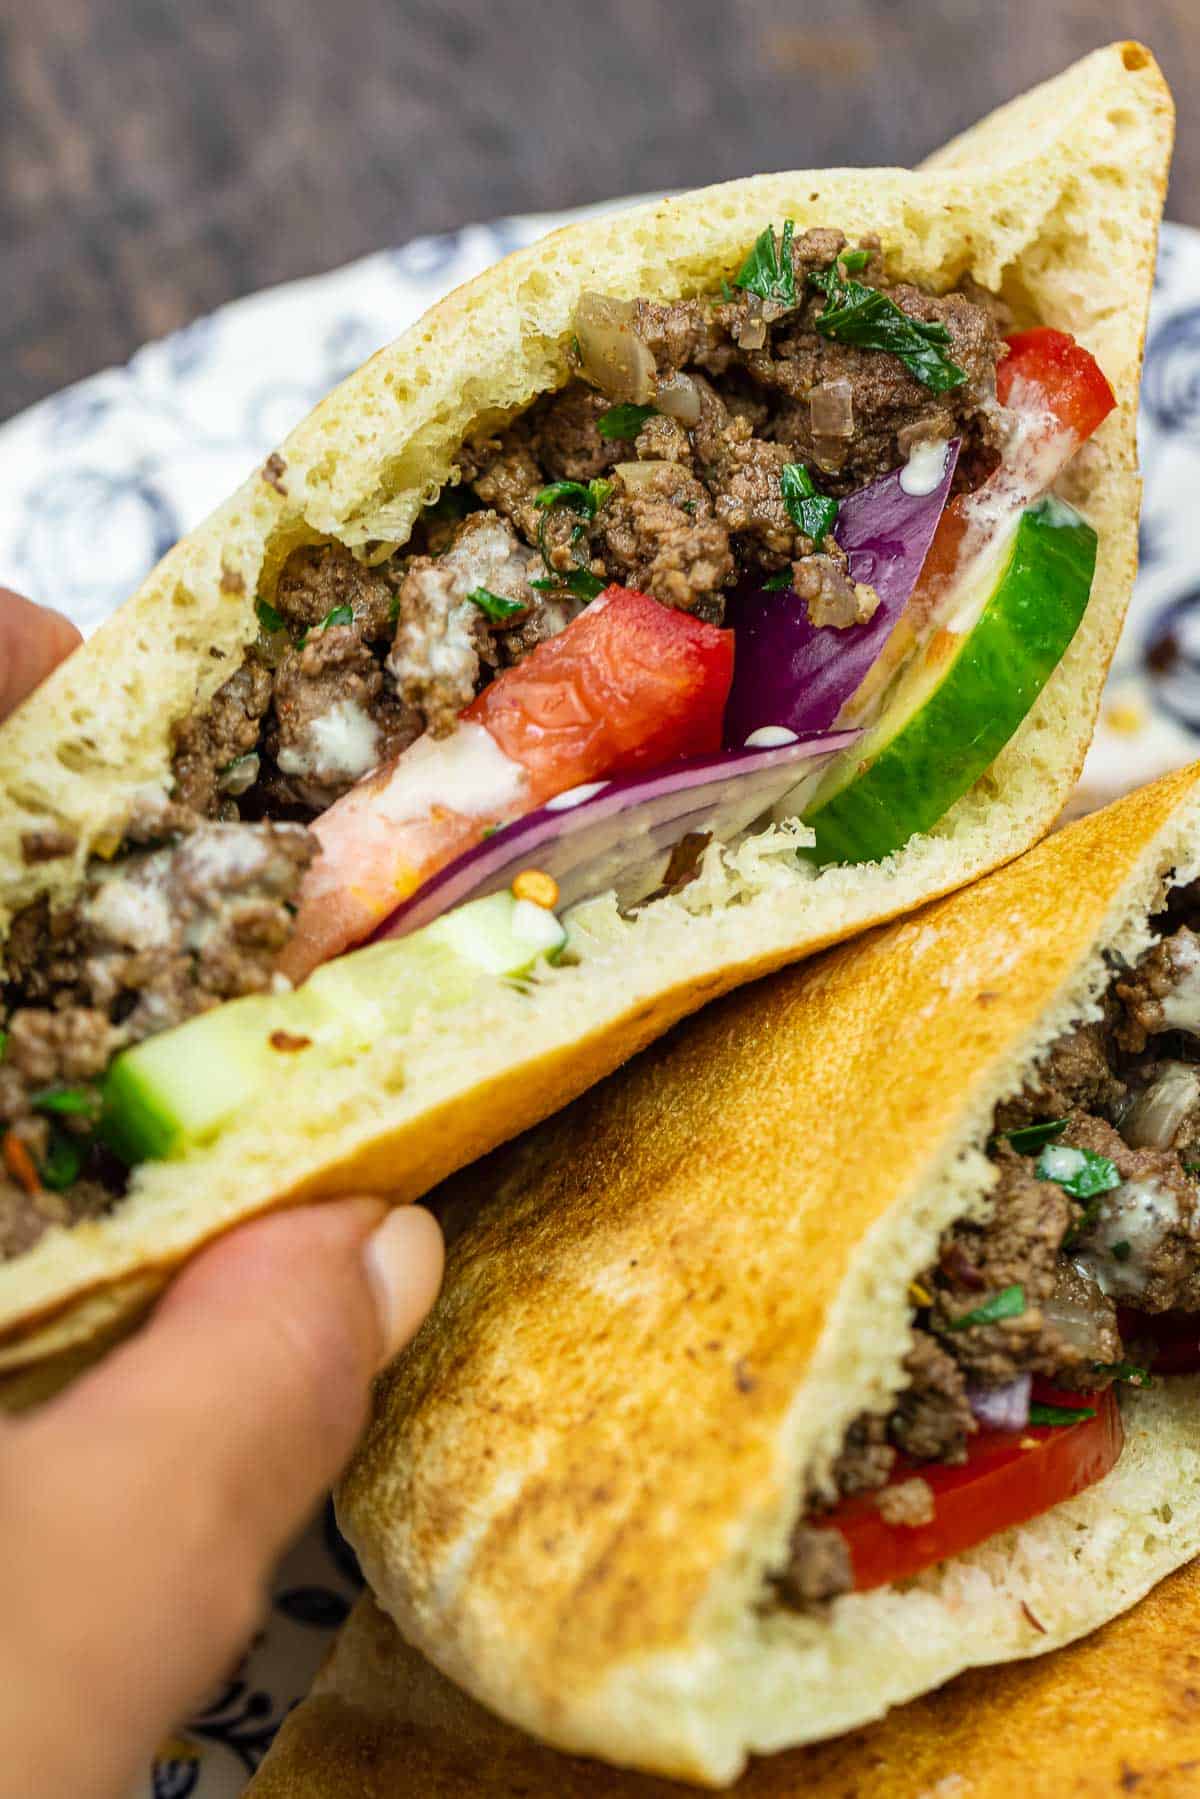 Middle Eastern ground beef pita sandwich with cucumber, tomatoes, red onion, and tahini sauce.